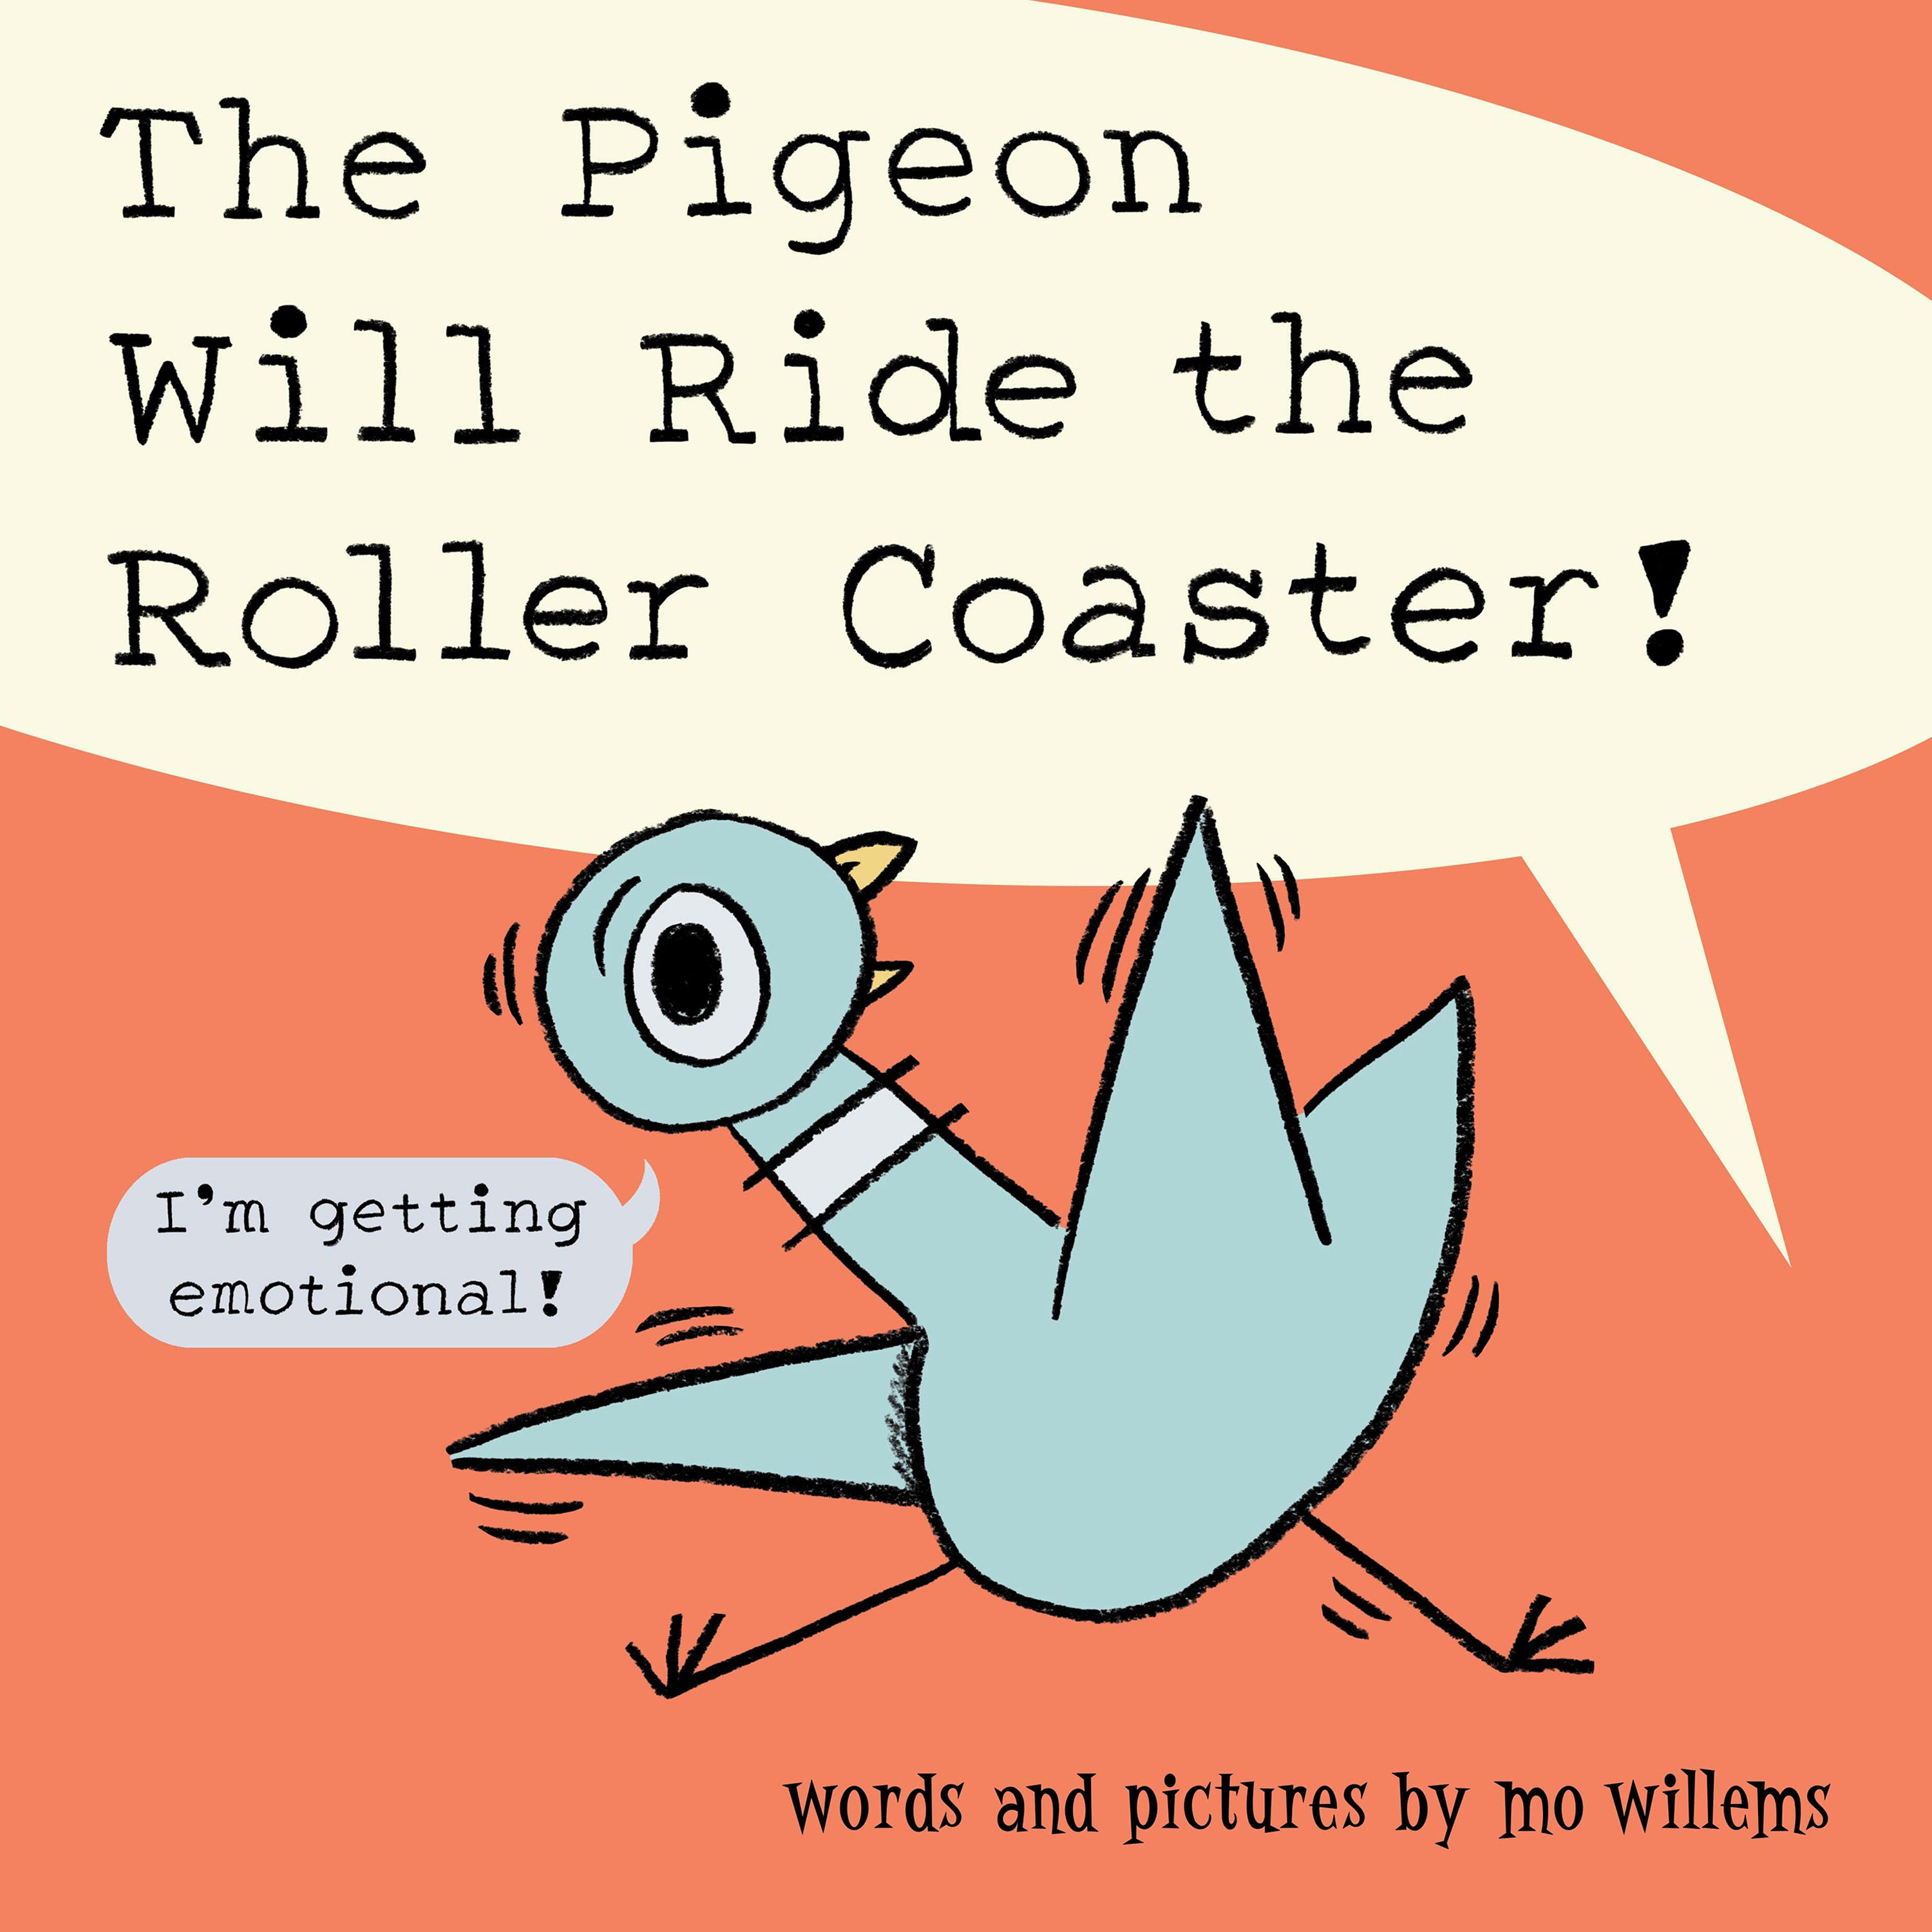 MO WILLEMS